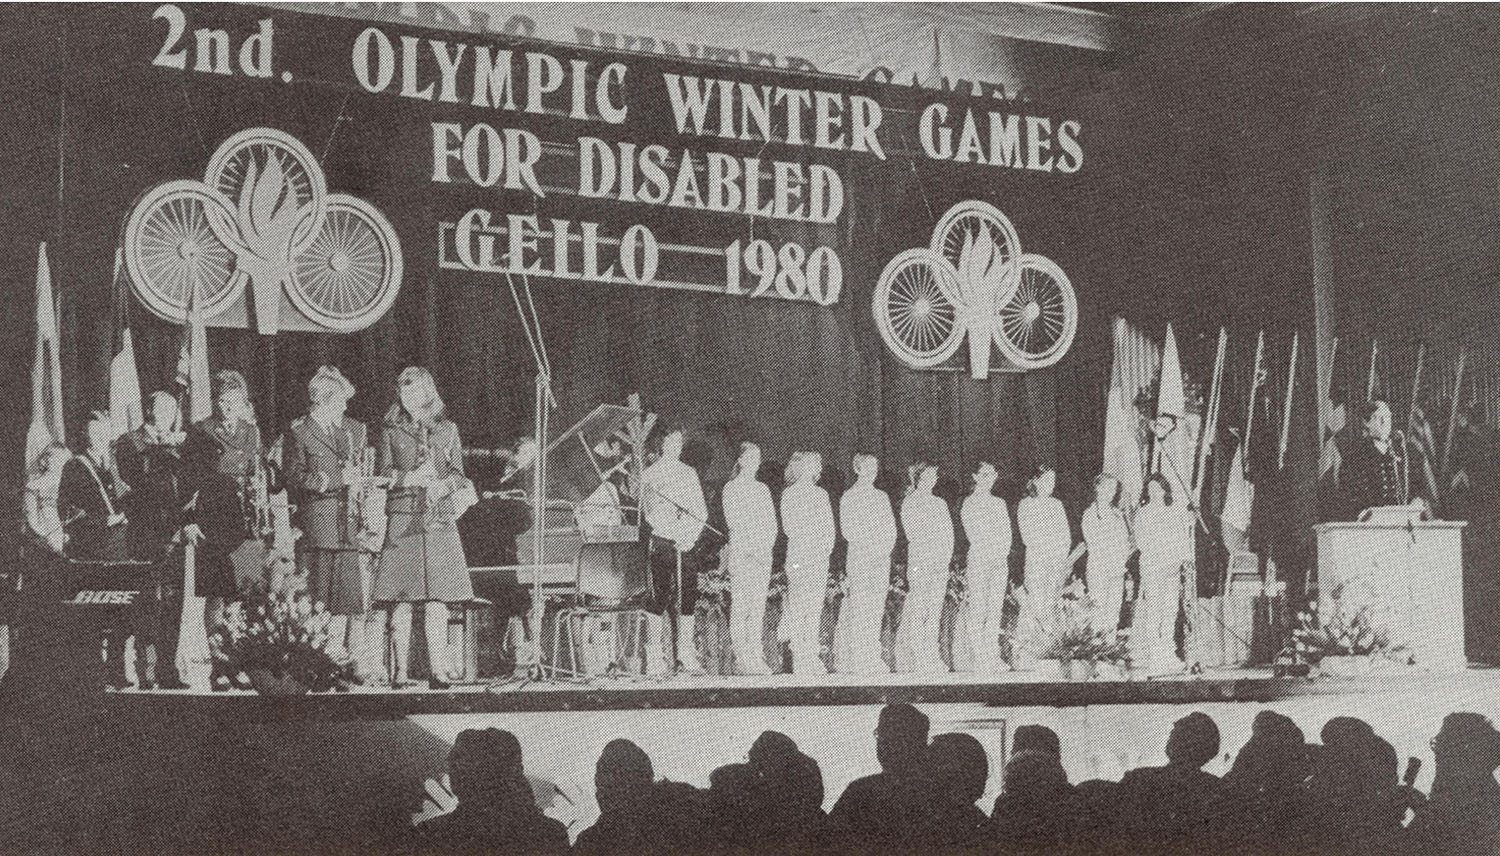 File photo of the Opening Ceremony of the 1980 Paralympic Winter Games held at Gello. 